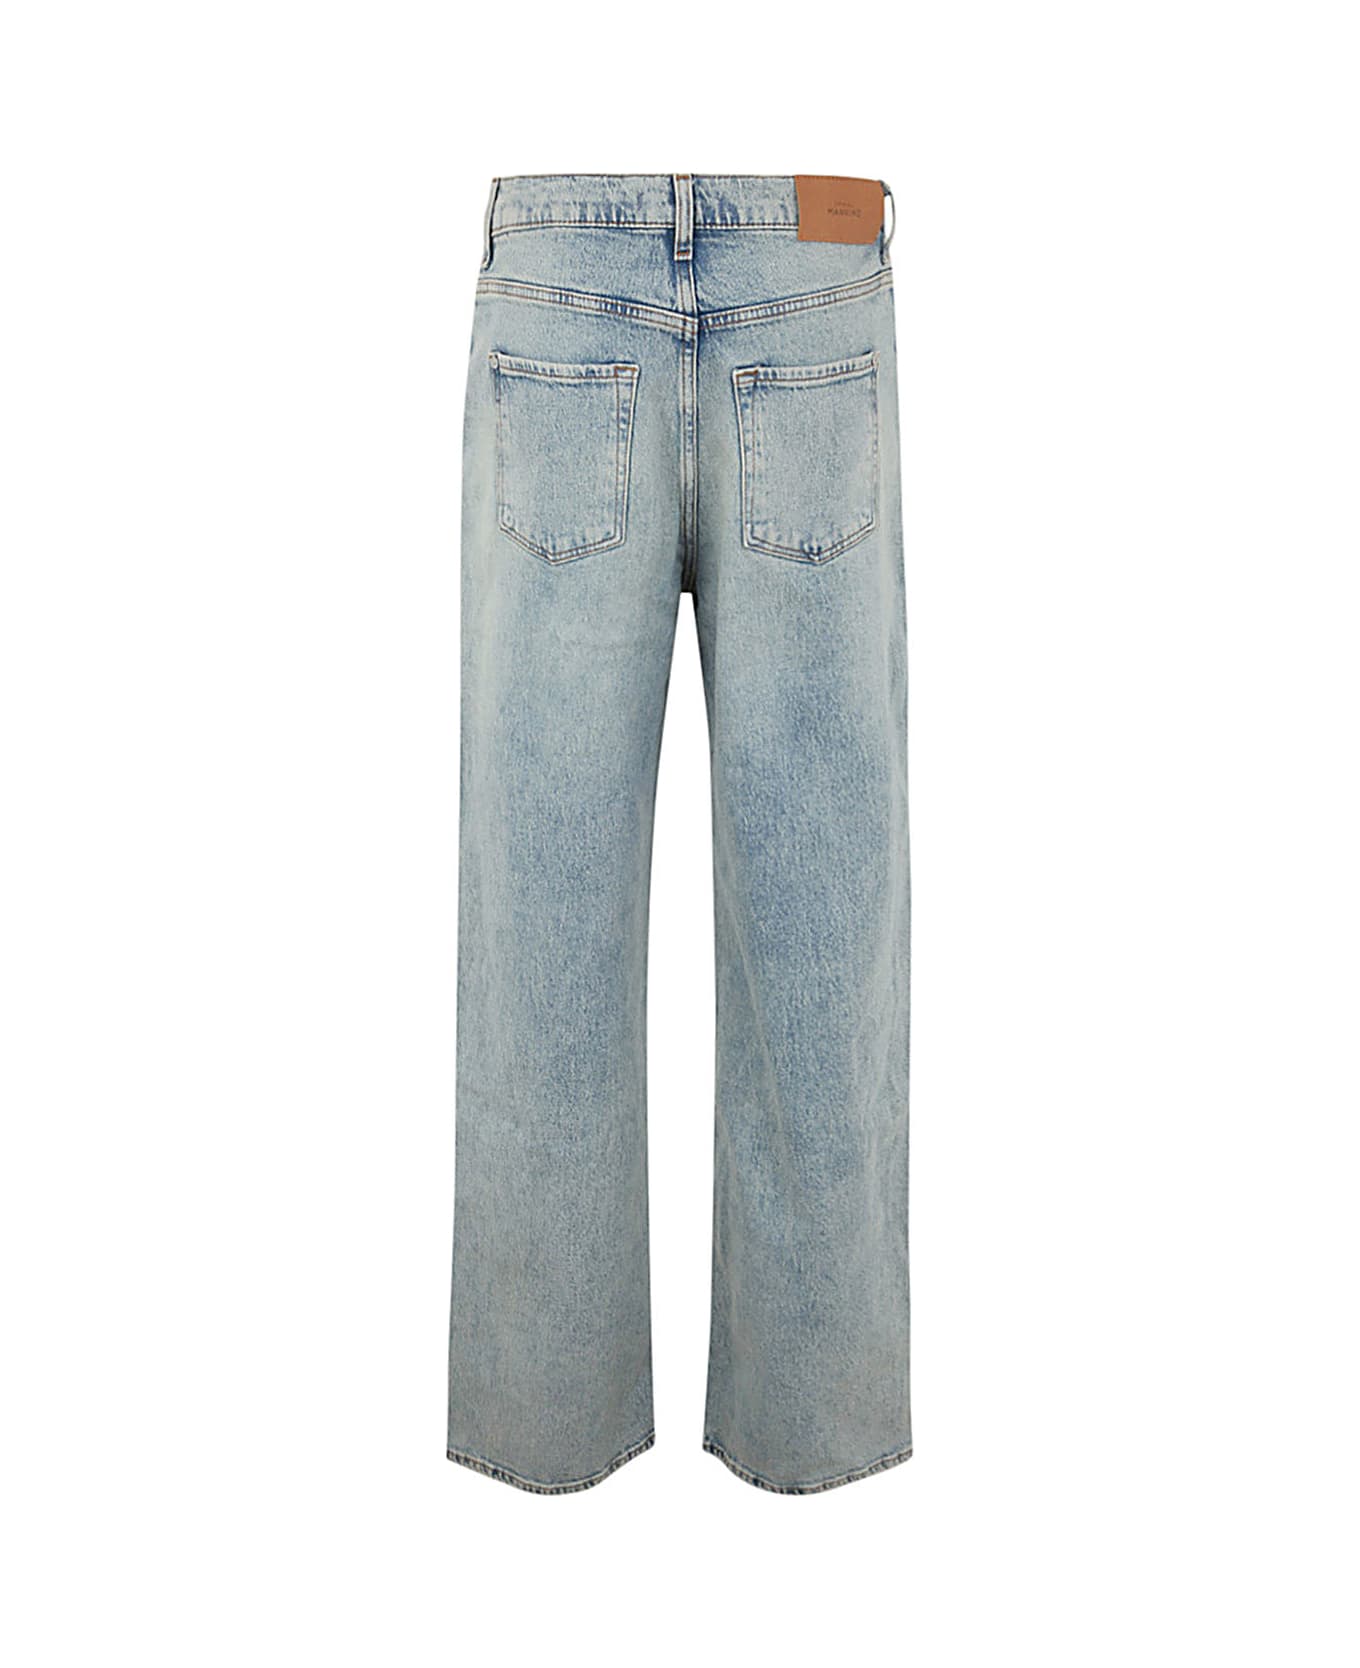 7 For All Mankind Scout Frost Jeans - Light Blue デニム